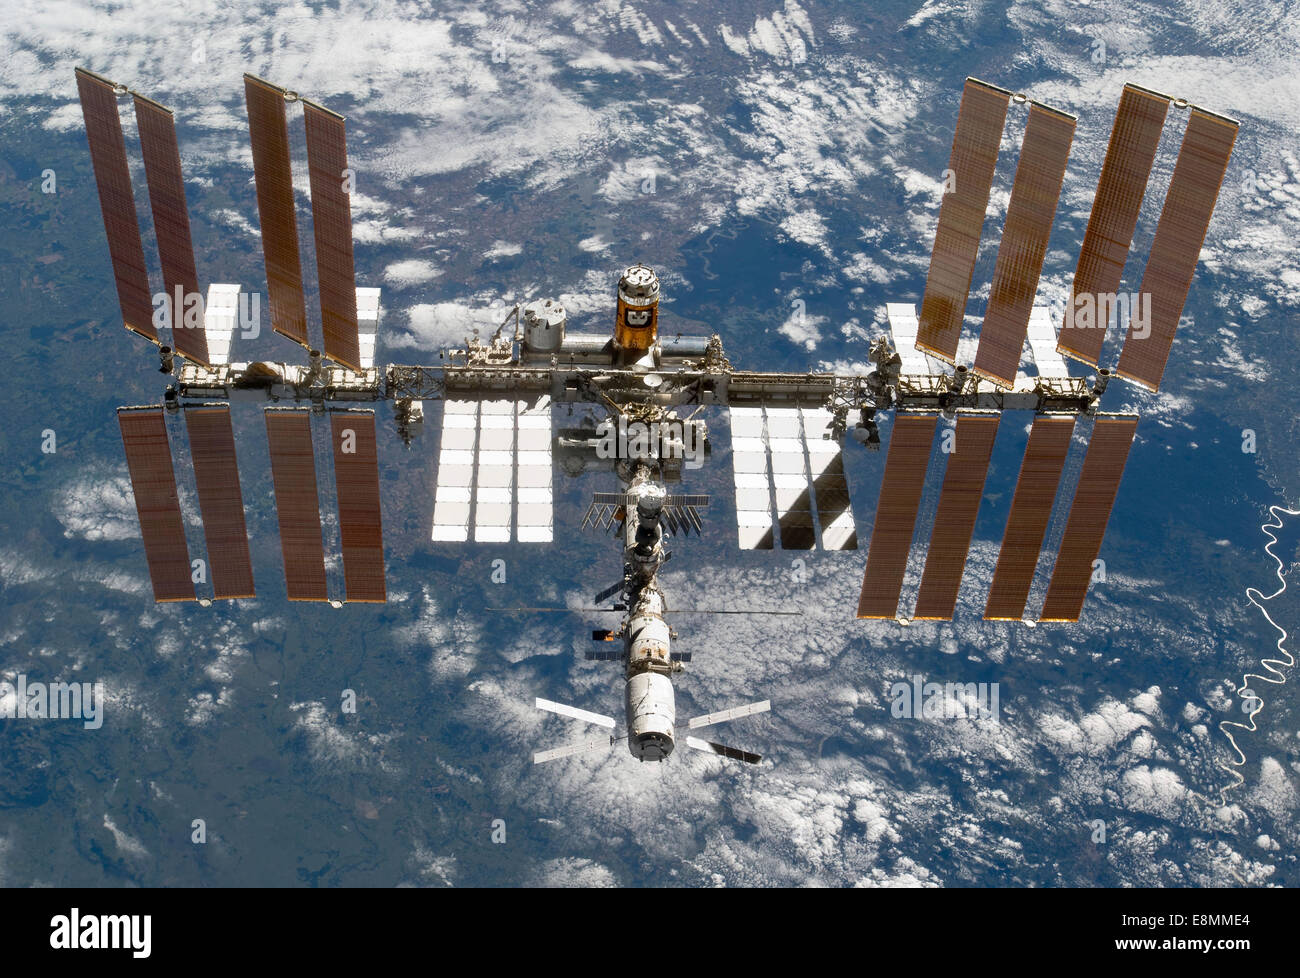 March 7, 2011 - The International Space Station backdropped by a blue and white part of Earth. Stock Photo